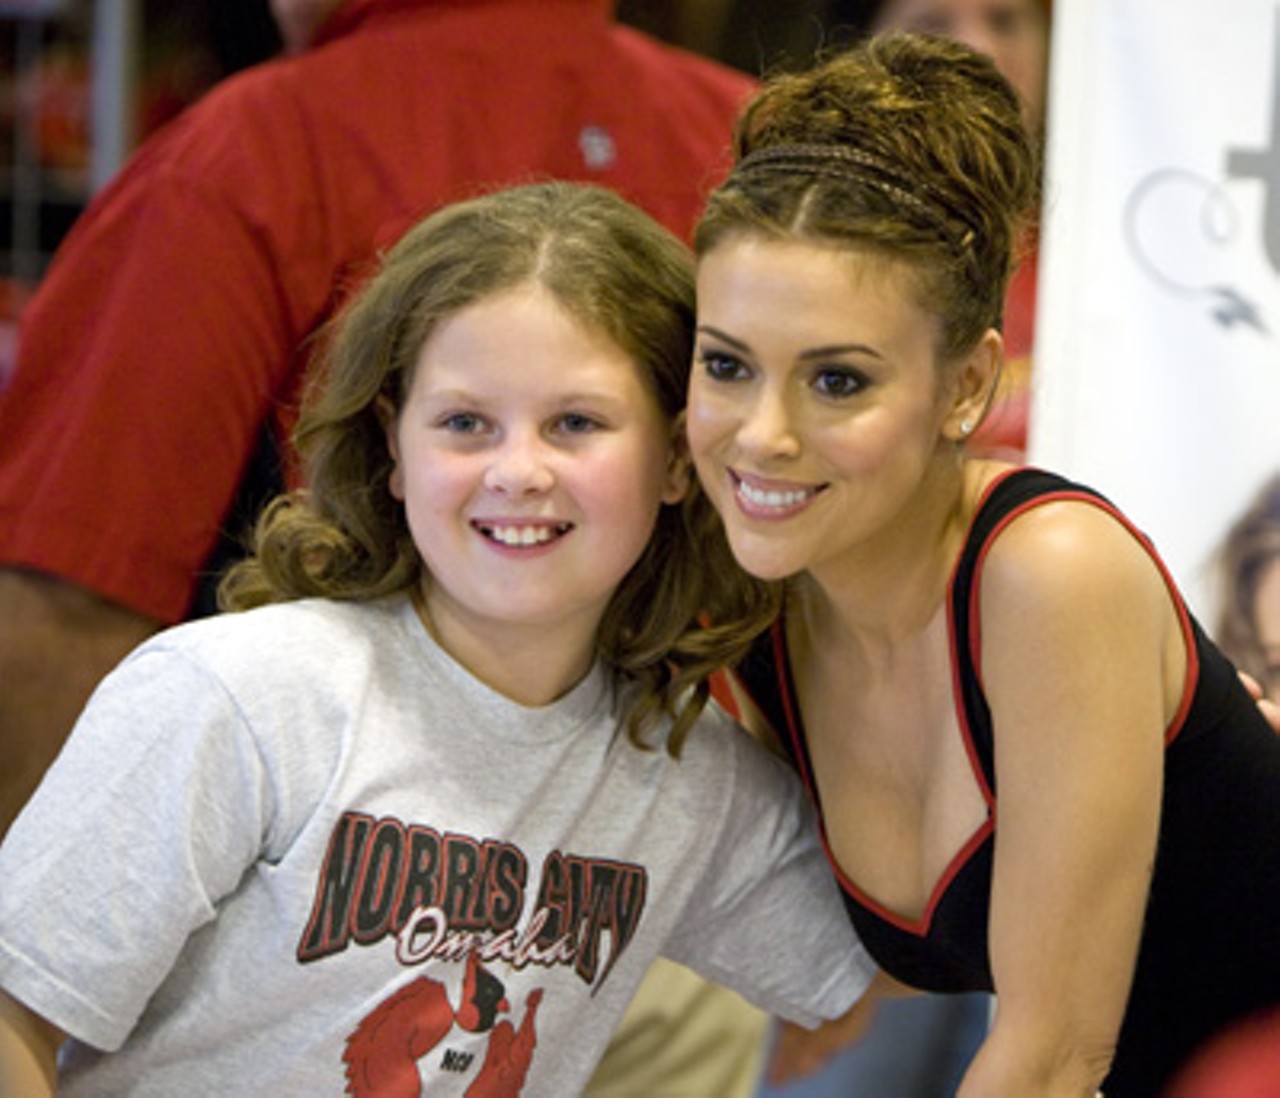 Milano poses with a young fan.